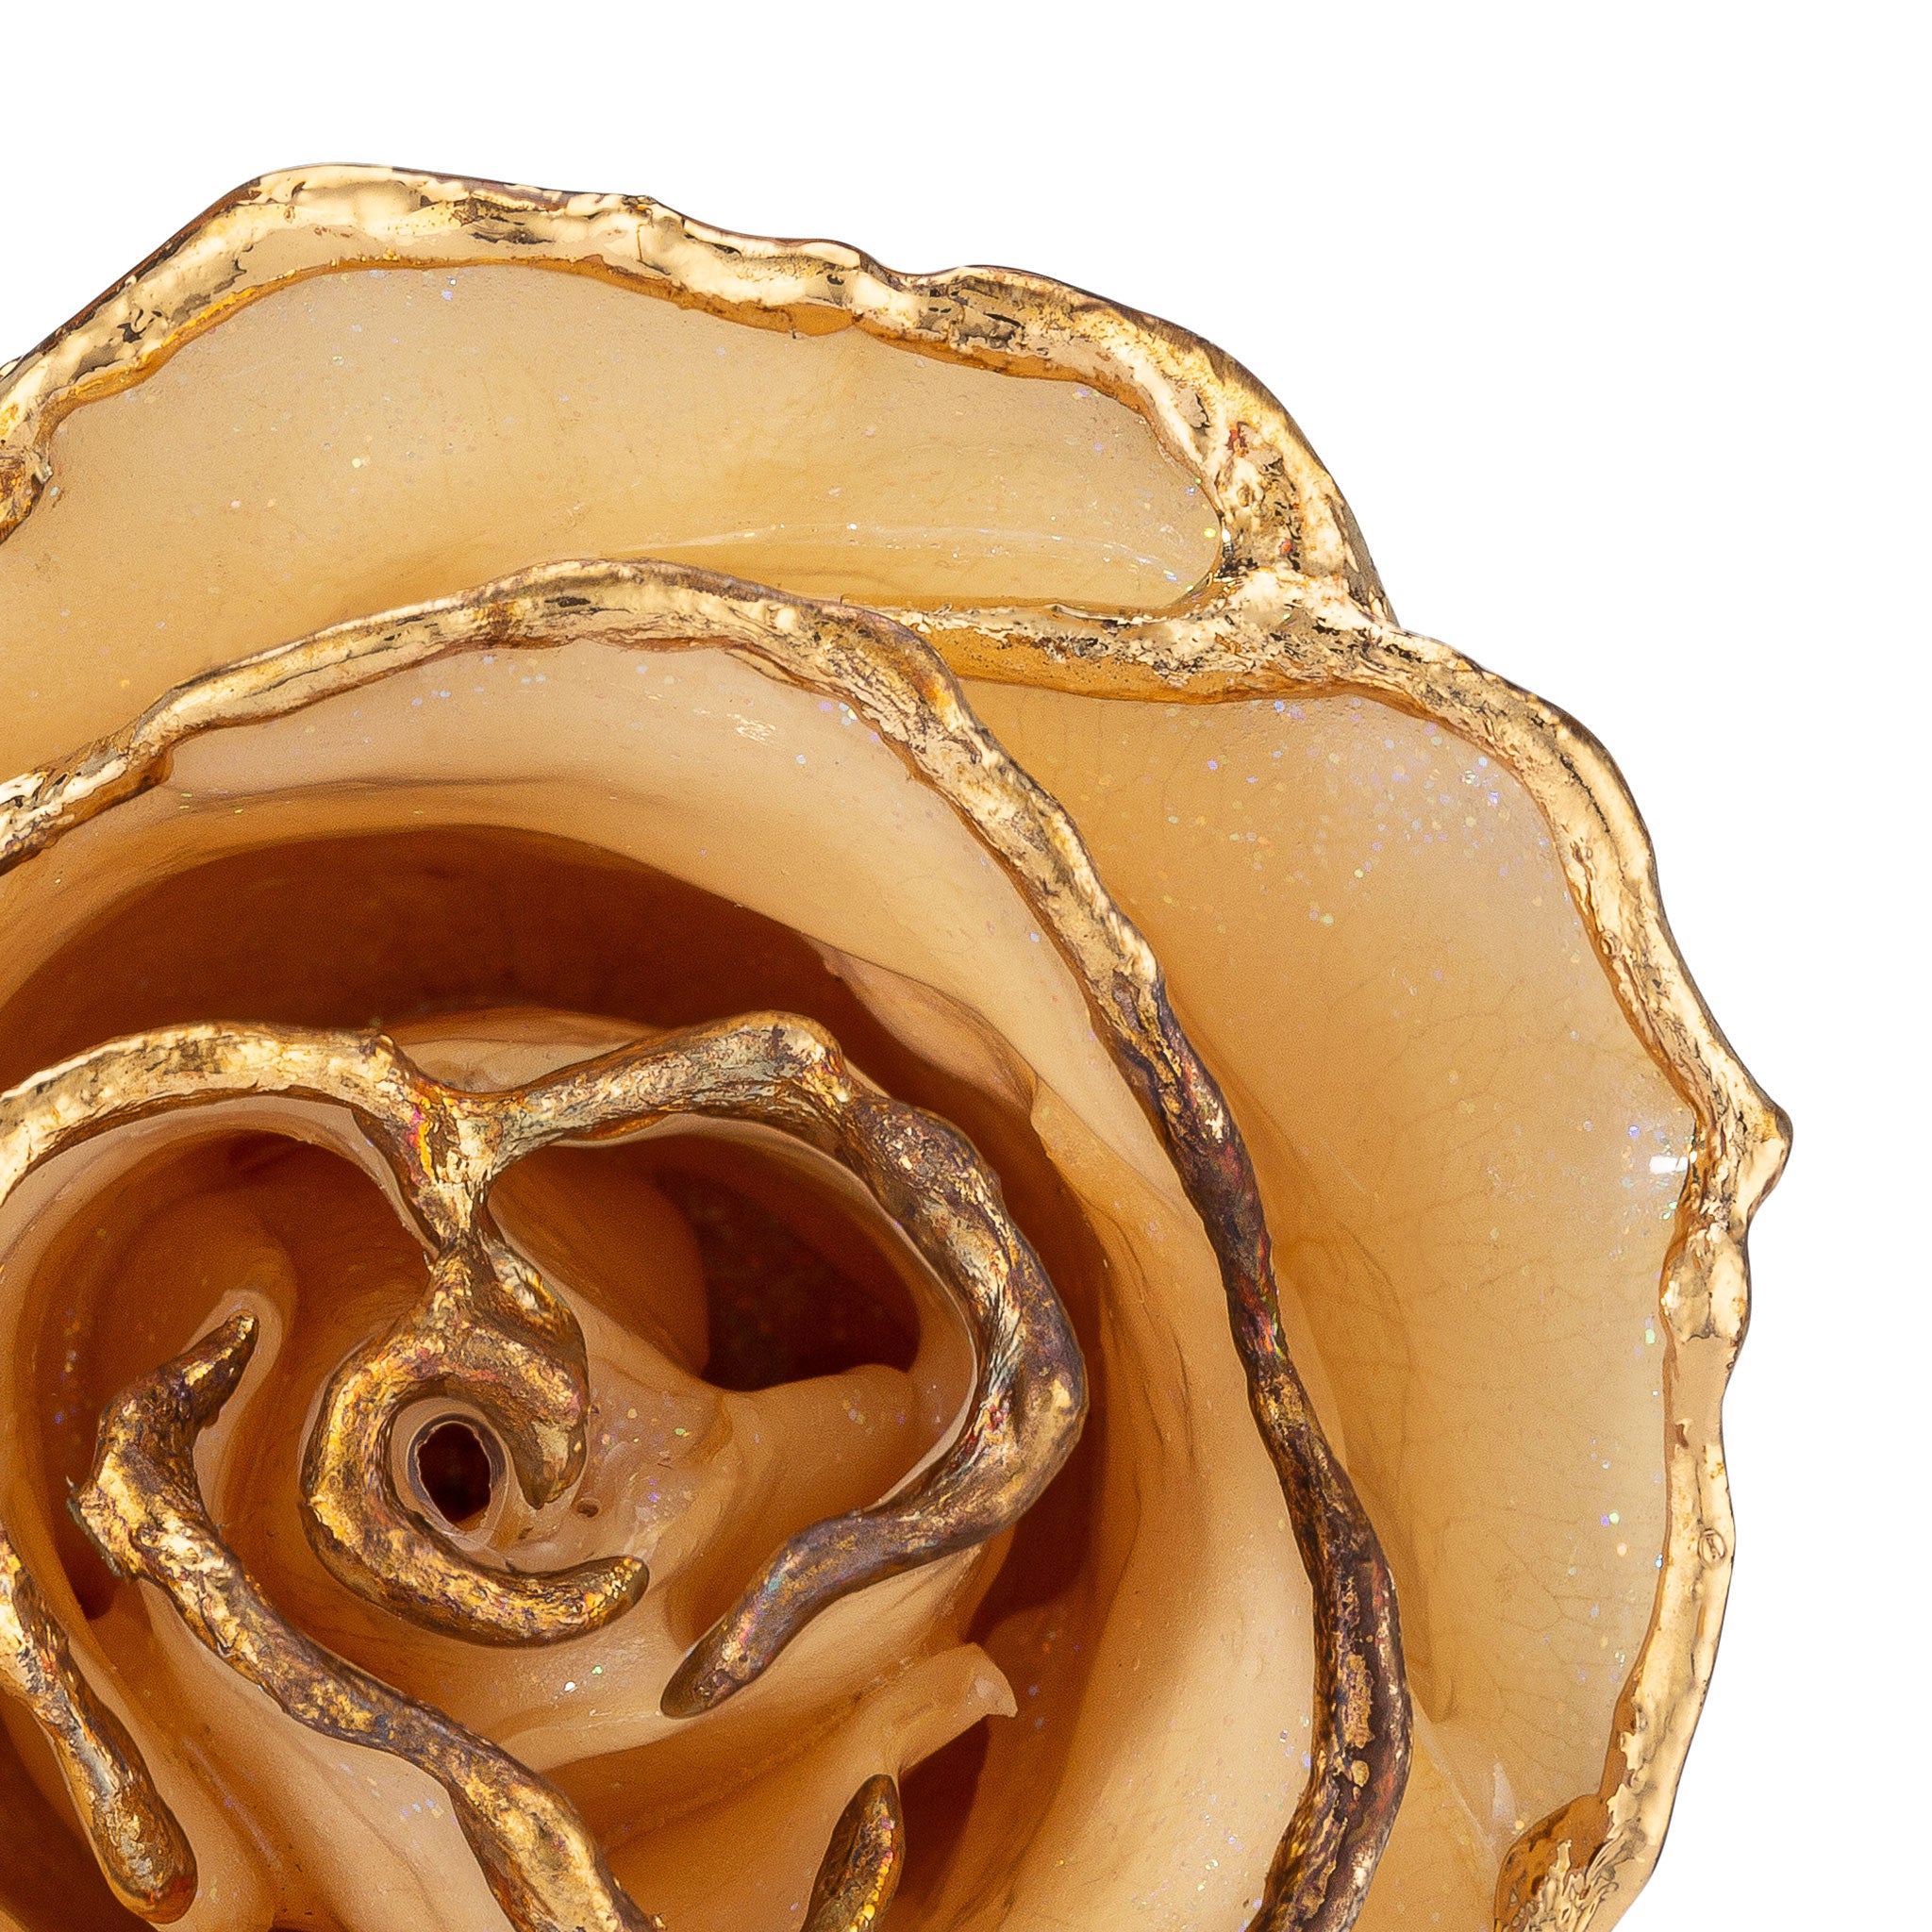 24K Gold Trimmed Forever Rose with Diamond Petals with Sparkles. View of Stem, Leaves, and Rose Petals and Showing Detail of Gold Trim Top Zoom View